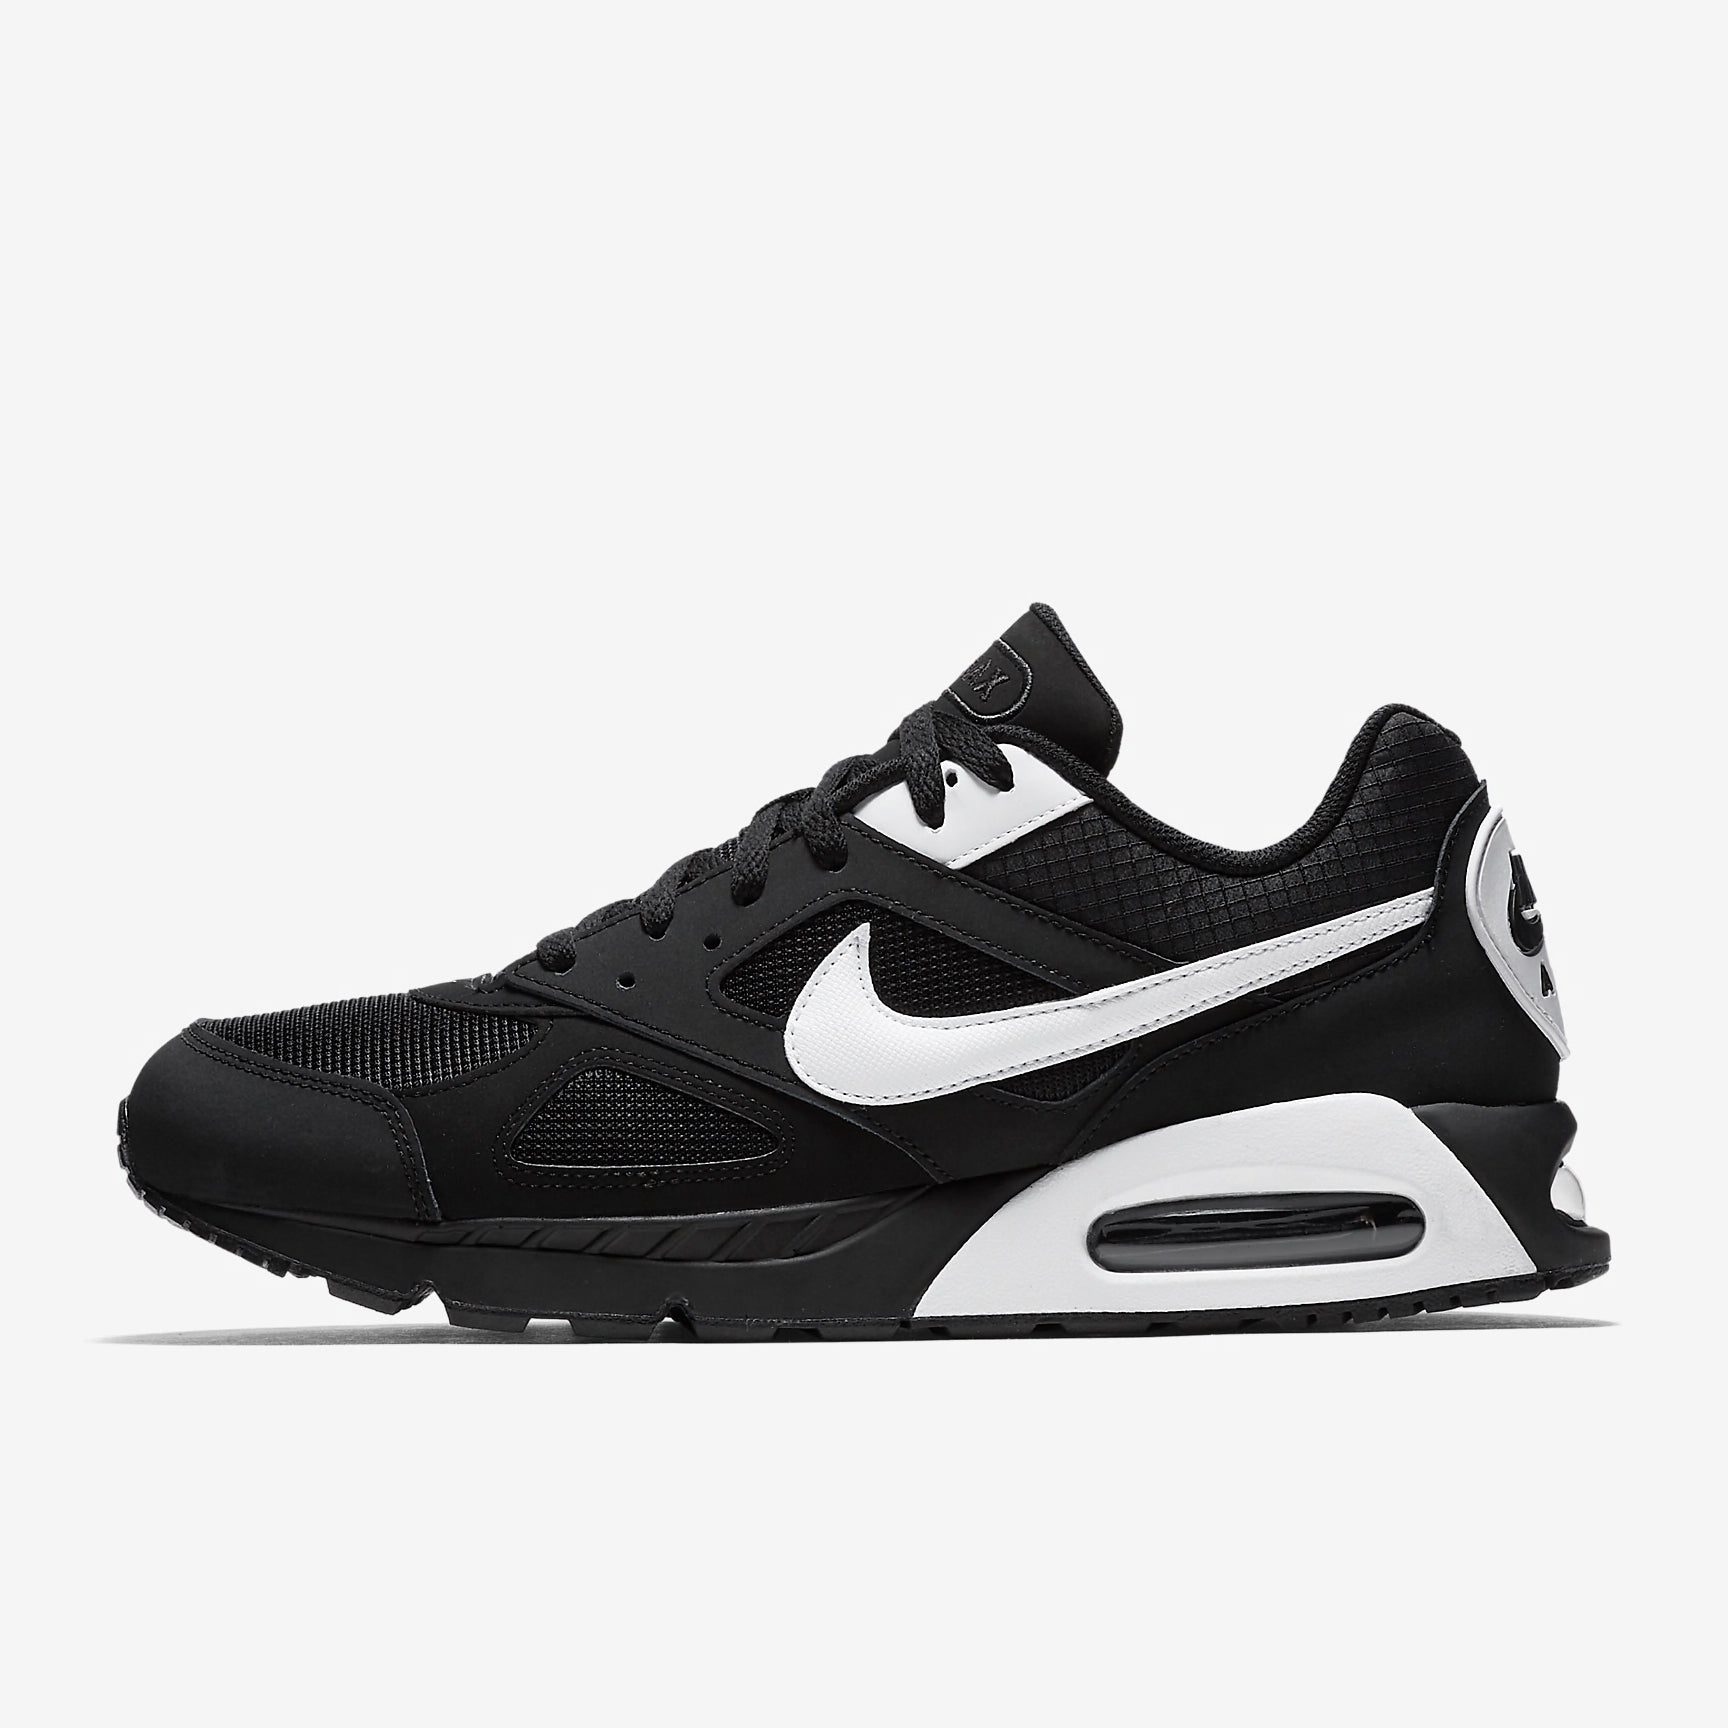 Men's Nike Air Max IVO Shoes in Black \u0026 White | Find Your Sole